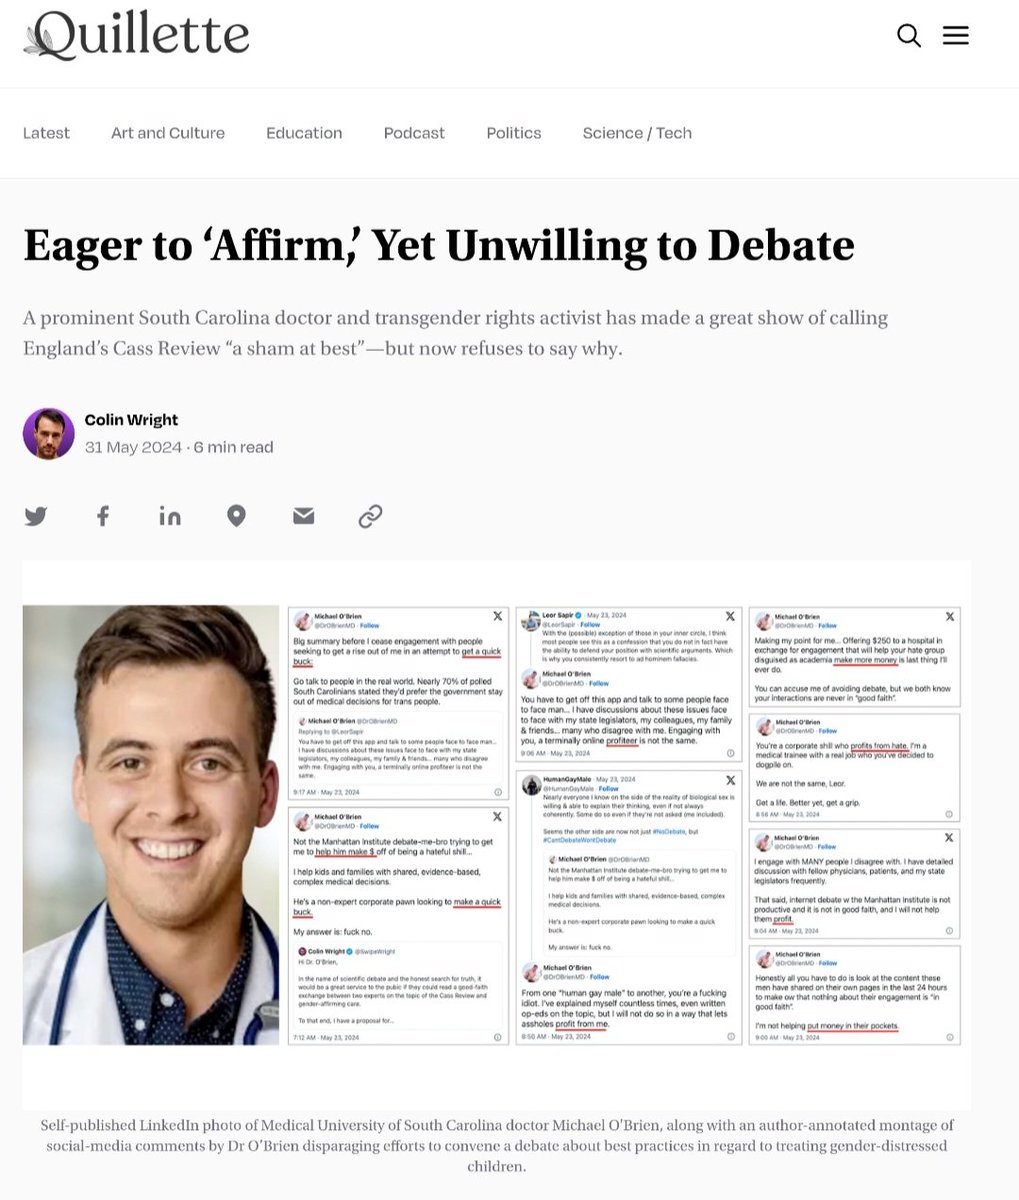 Eager to ‘Affirm,’ Yet Unwilling to Debate: 'A prominent South Carolina doctor & transgender rights activist [Michael O’Brien] has made a great show of calling England’s Cass Review 'a sham at best'—but now refuses to say why.' @SwipeWright in @Quillette quillette.com/2024/05/31/eag…